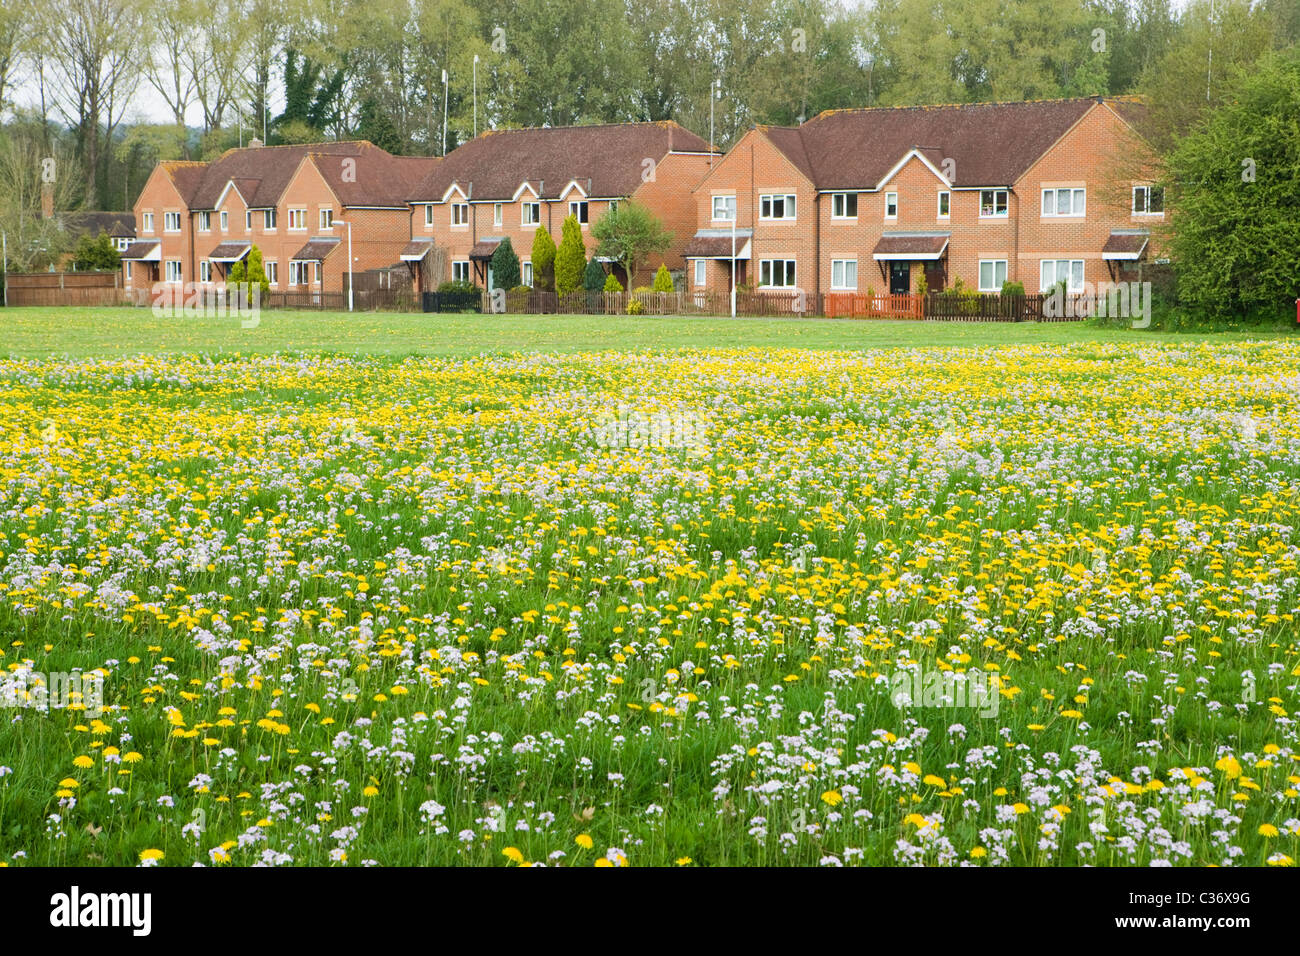 Houses by village green with flowers. Compton, Surrey, UK Stock Photo